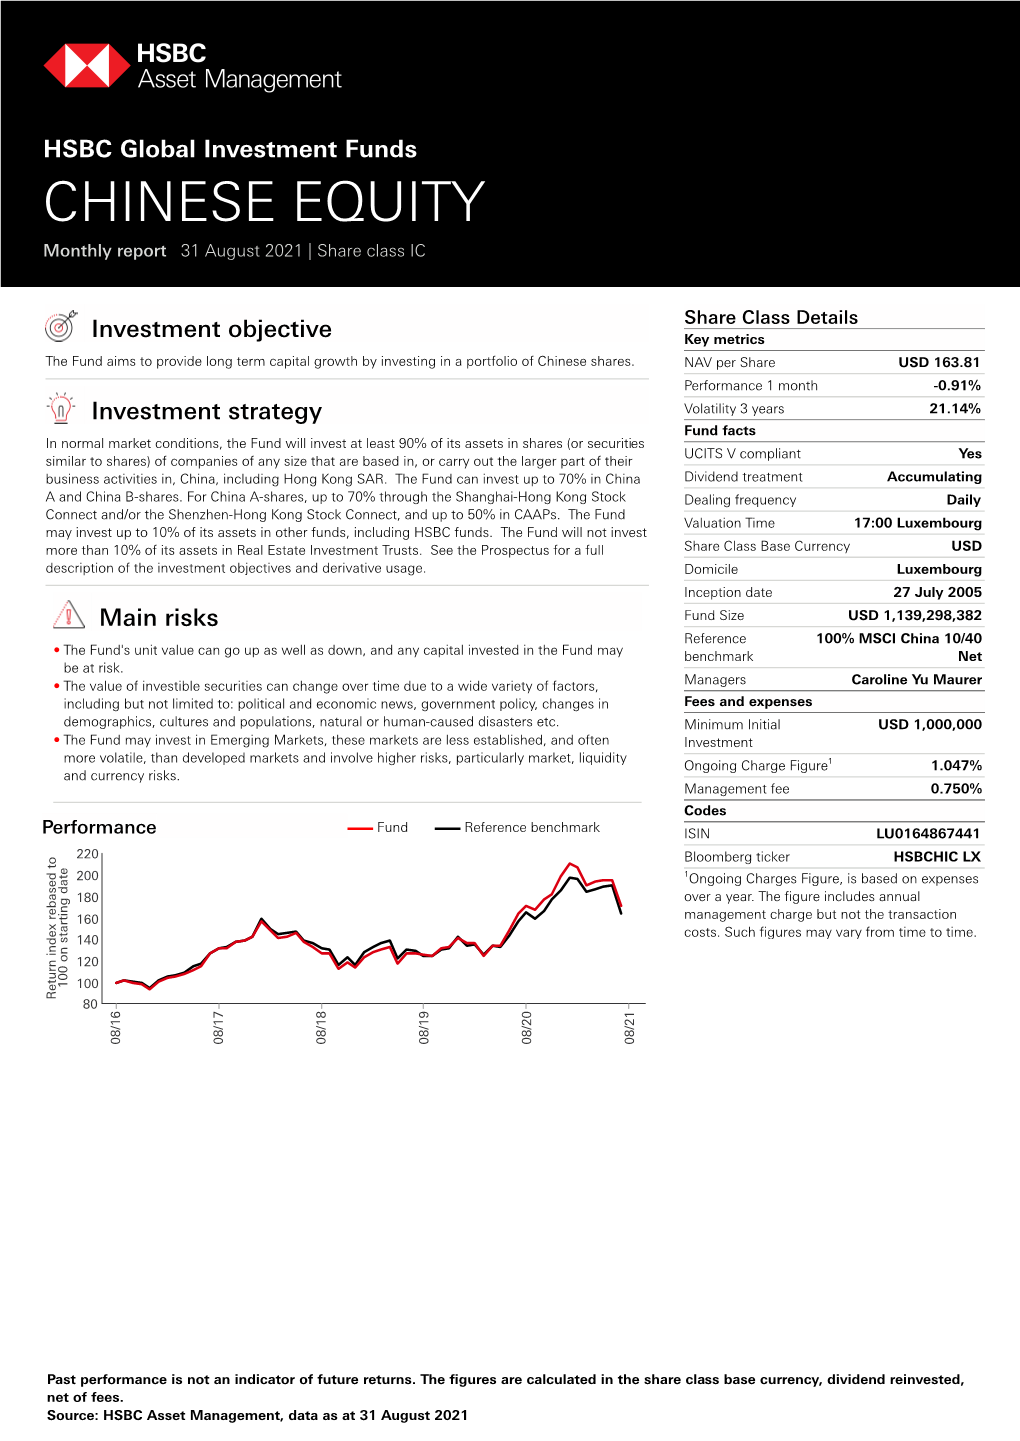 HSBC Global Investment Funds CHINESE EQUITY Monthly Report 31 August 2021 | Share Class IC